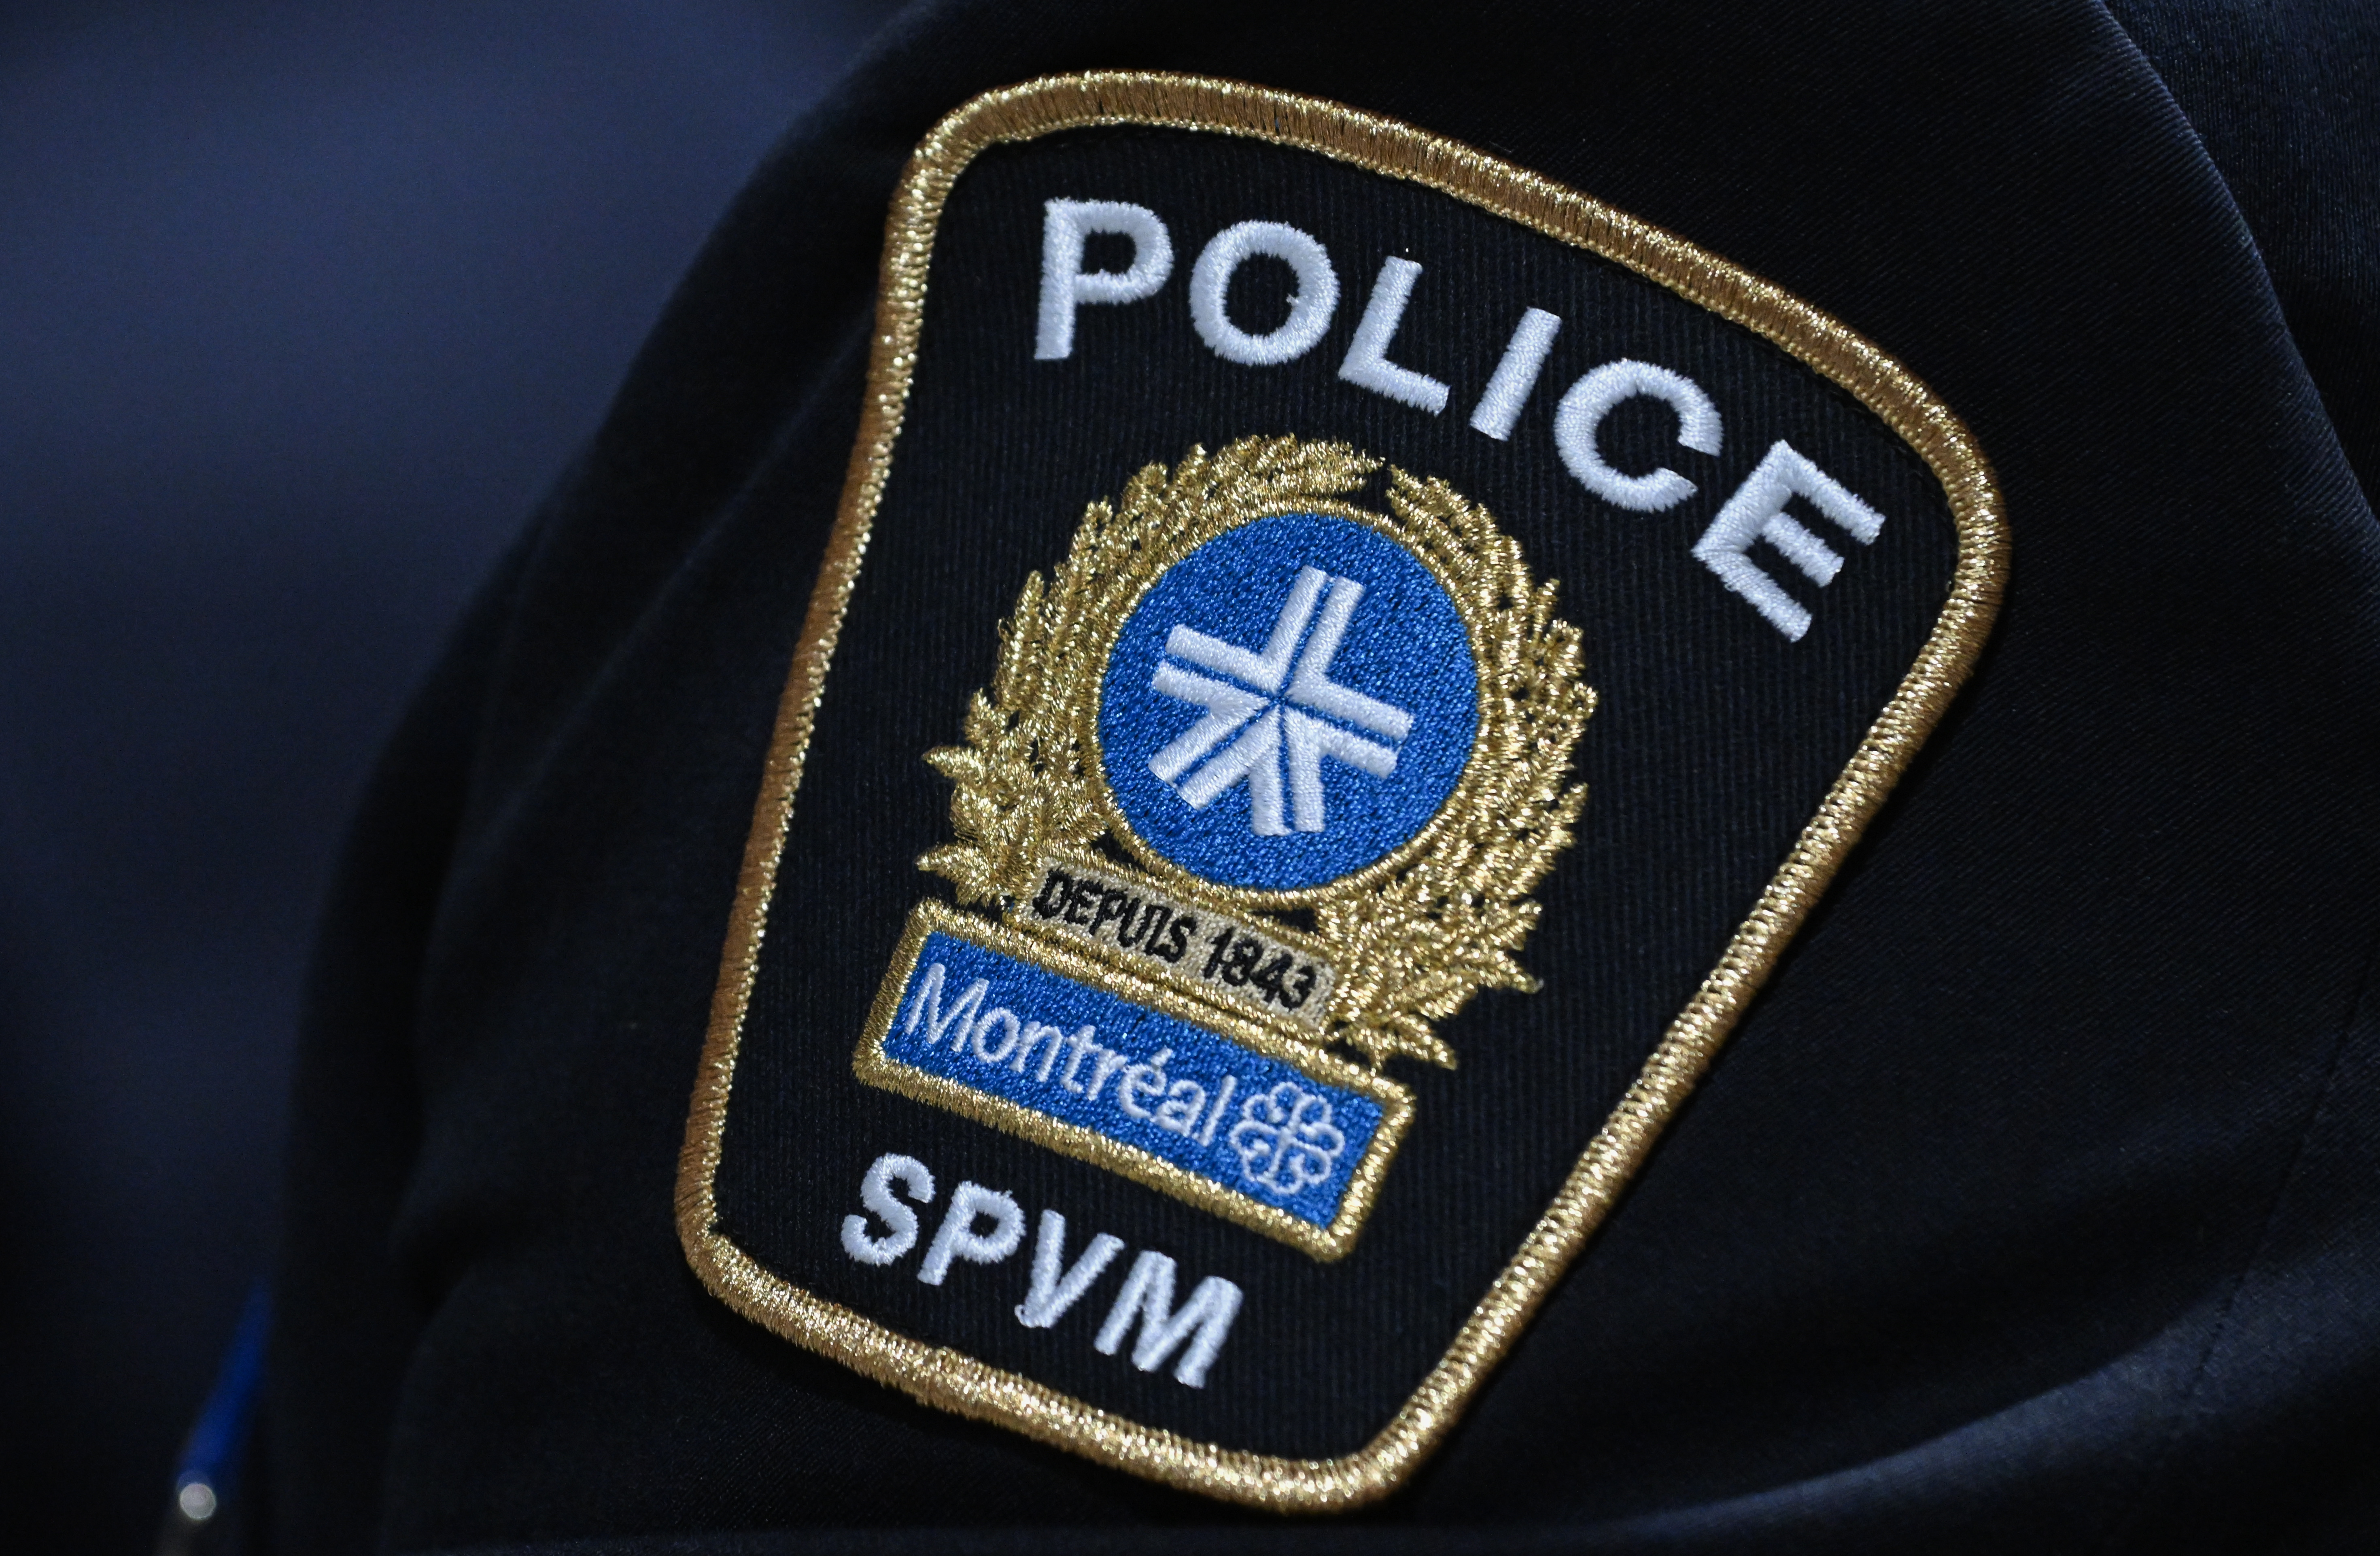 Pedestrian seriously injured after being hit by truck in Montreal’s east end, police say